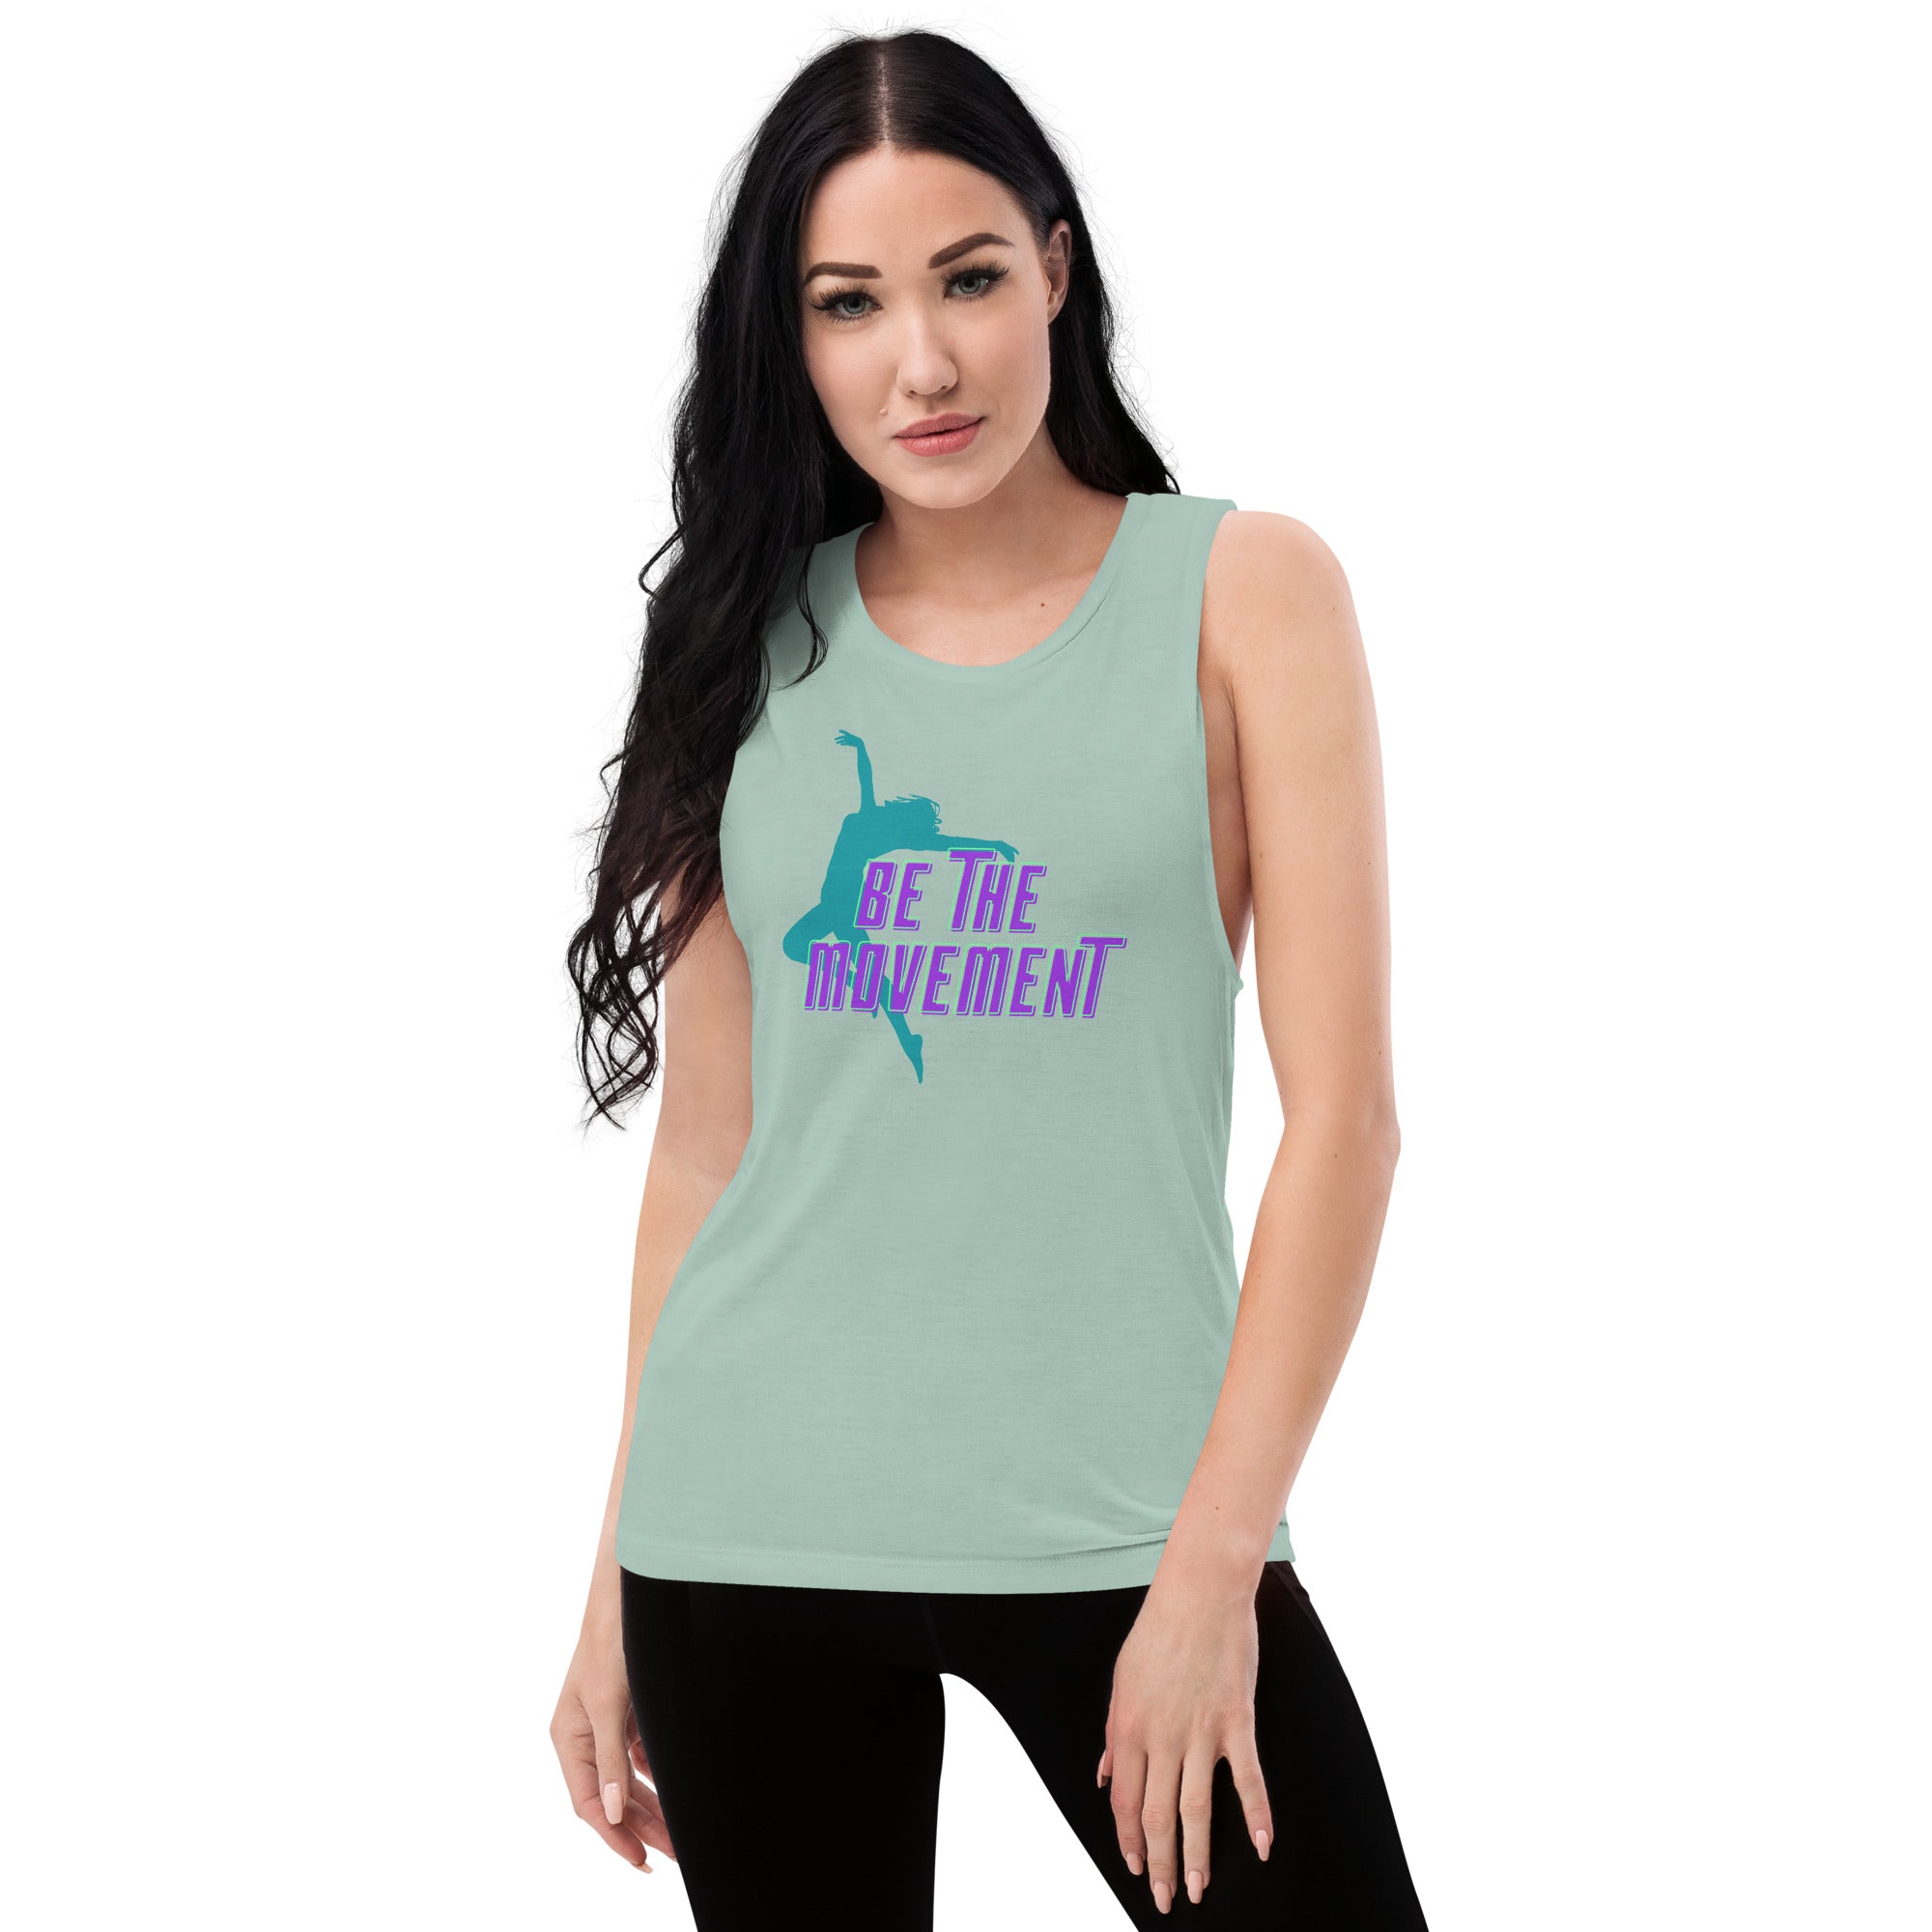 Be The Movement Women's Muscle Tank